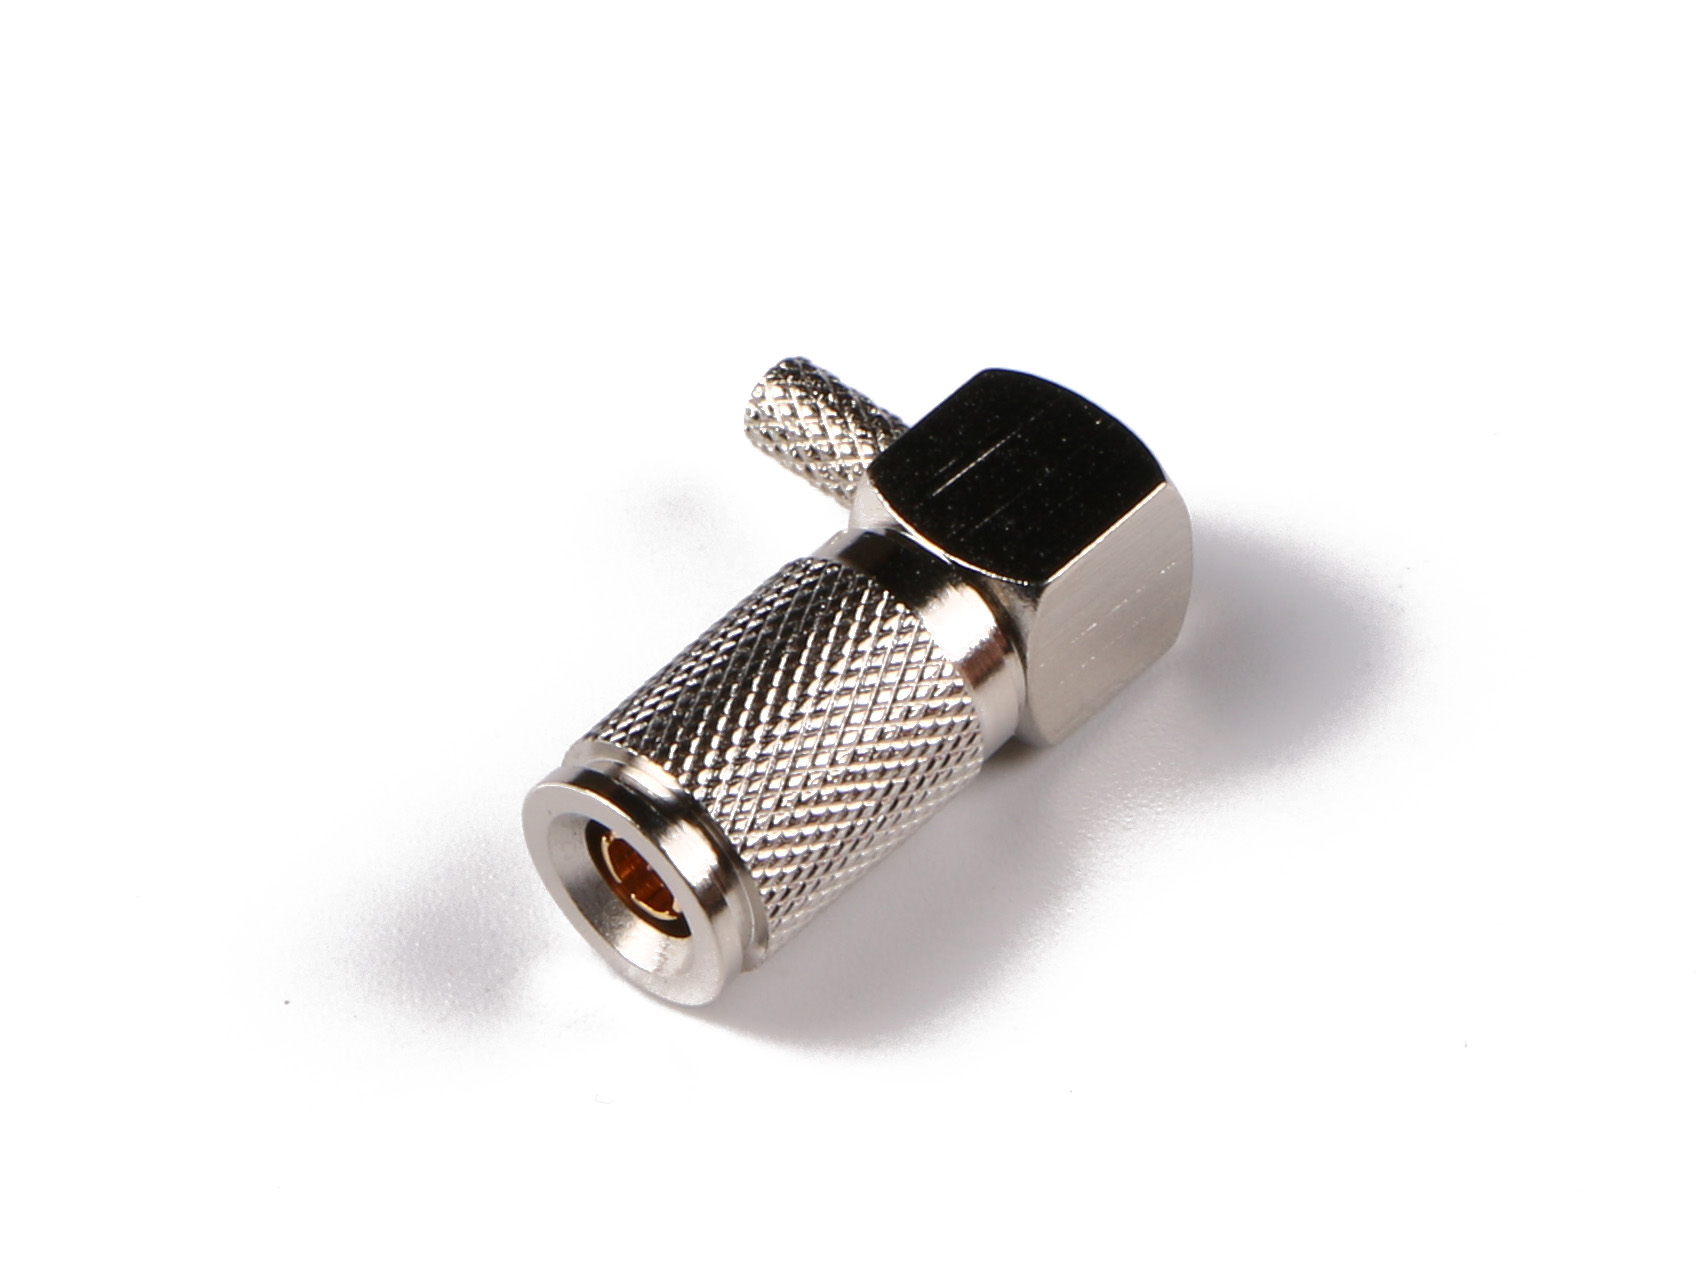 1.0/2.3(CC4) Male RA Connector for Flexible Cable